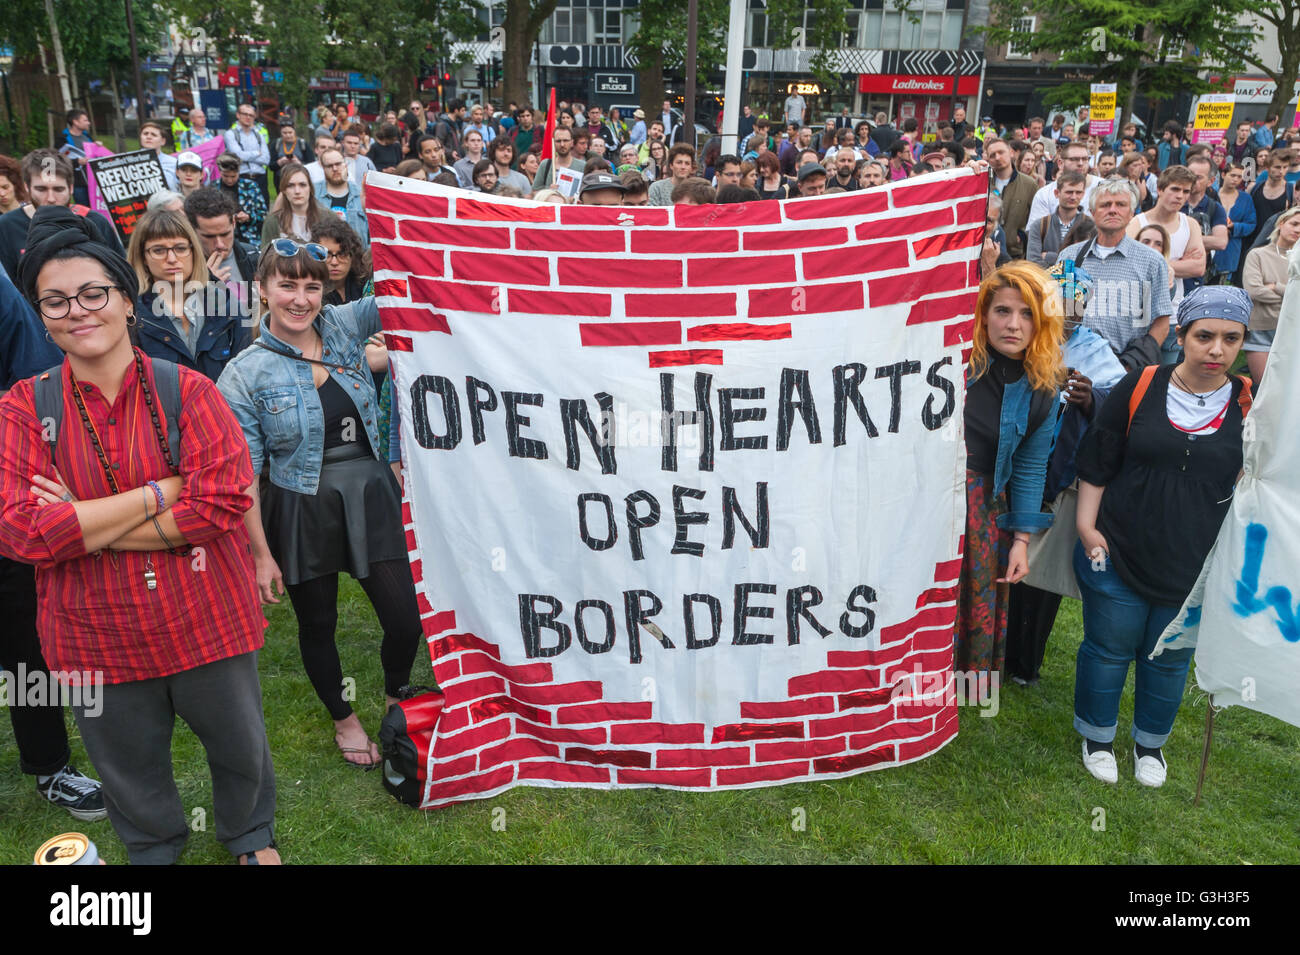 London, UK. June 24th 2016. Women hold a banner 'Open Hearts Open Borders' at the front of the crowd at the rally in Altab Ali Park on the day after the UK voted to leave the EU against racism, for migrant rights and against fascist violence. They say that migration and immigrants have been attacked and scapegoated not only by both Remain and Leave campaigns but by mainstream parties and media over more than 20 years, stoking up hatred by insisting immigrants are a 'problem'.Peter Marshall/Alamy Live News Stock Photo